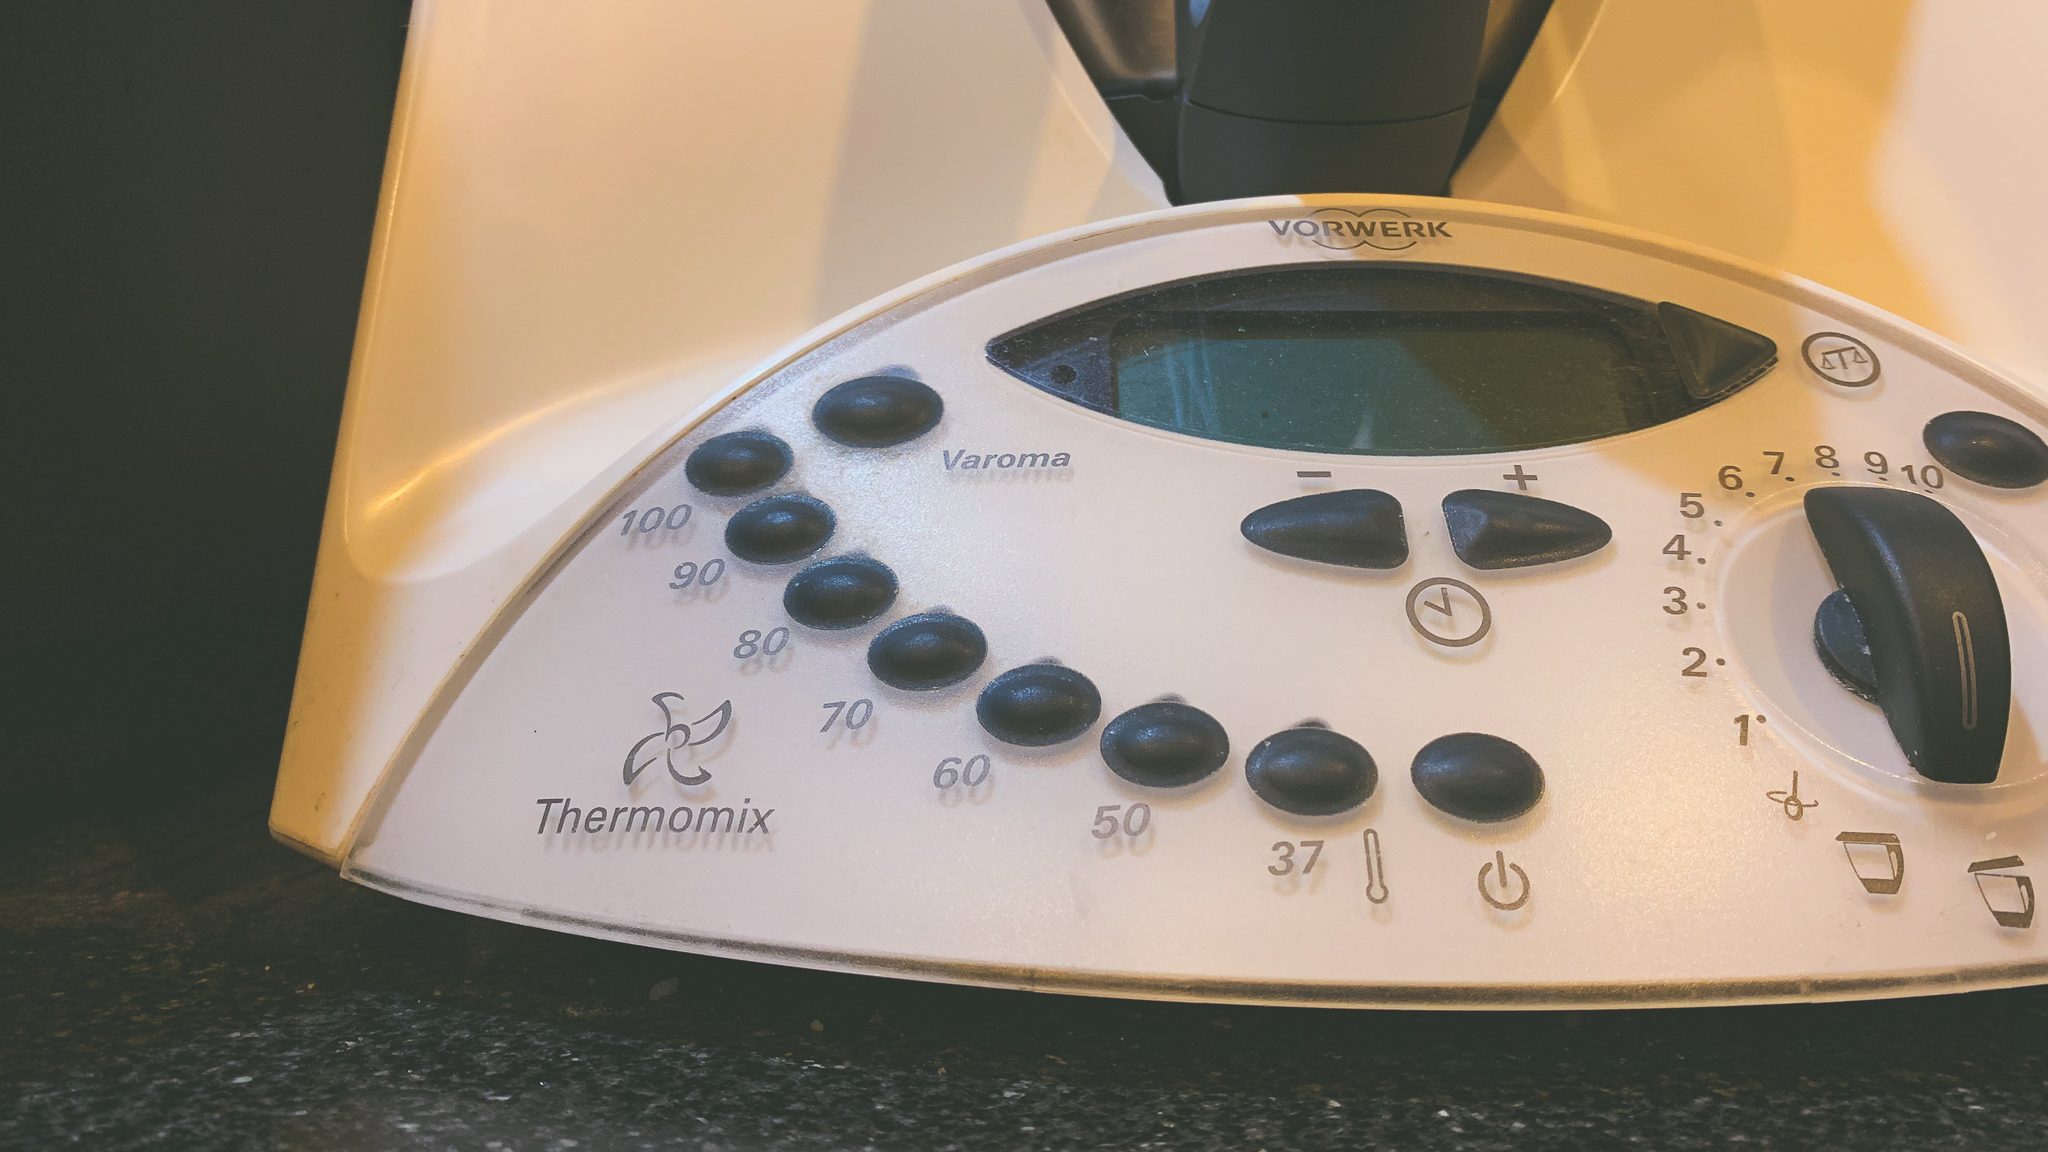 Thoughts on the Thermomix